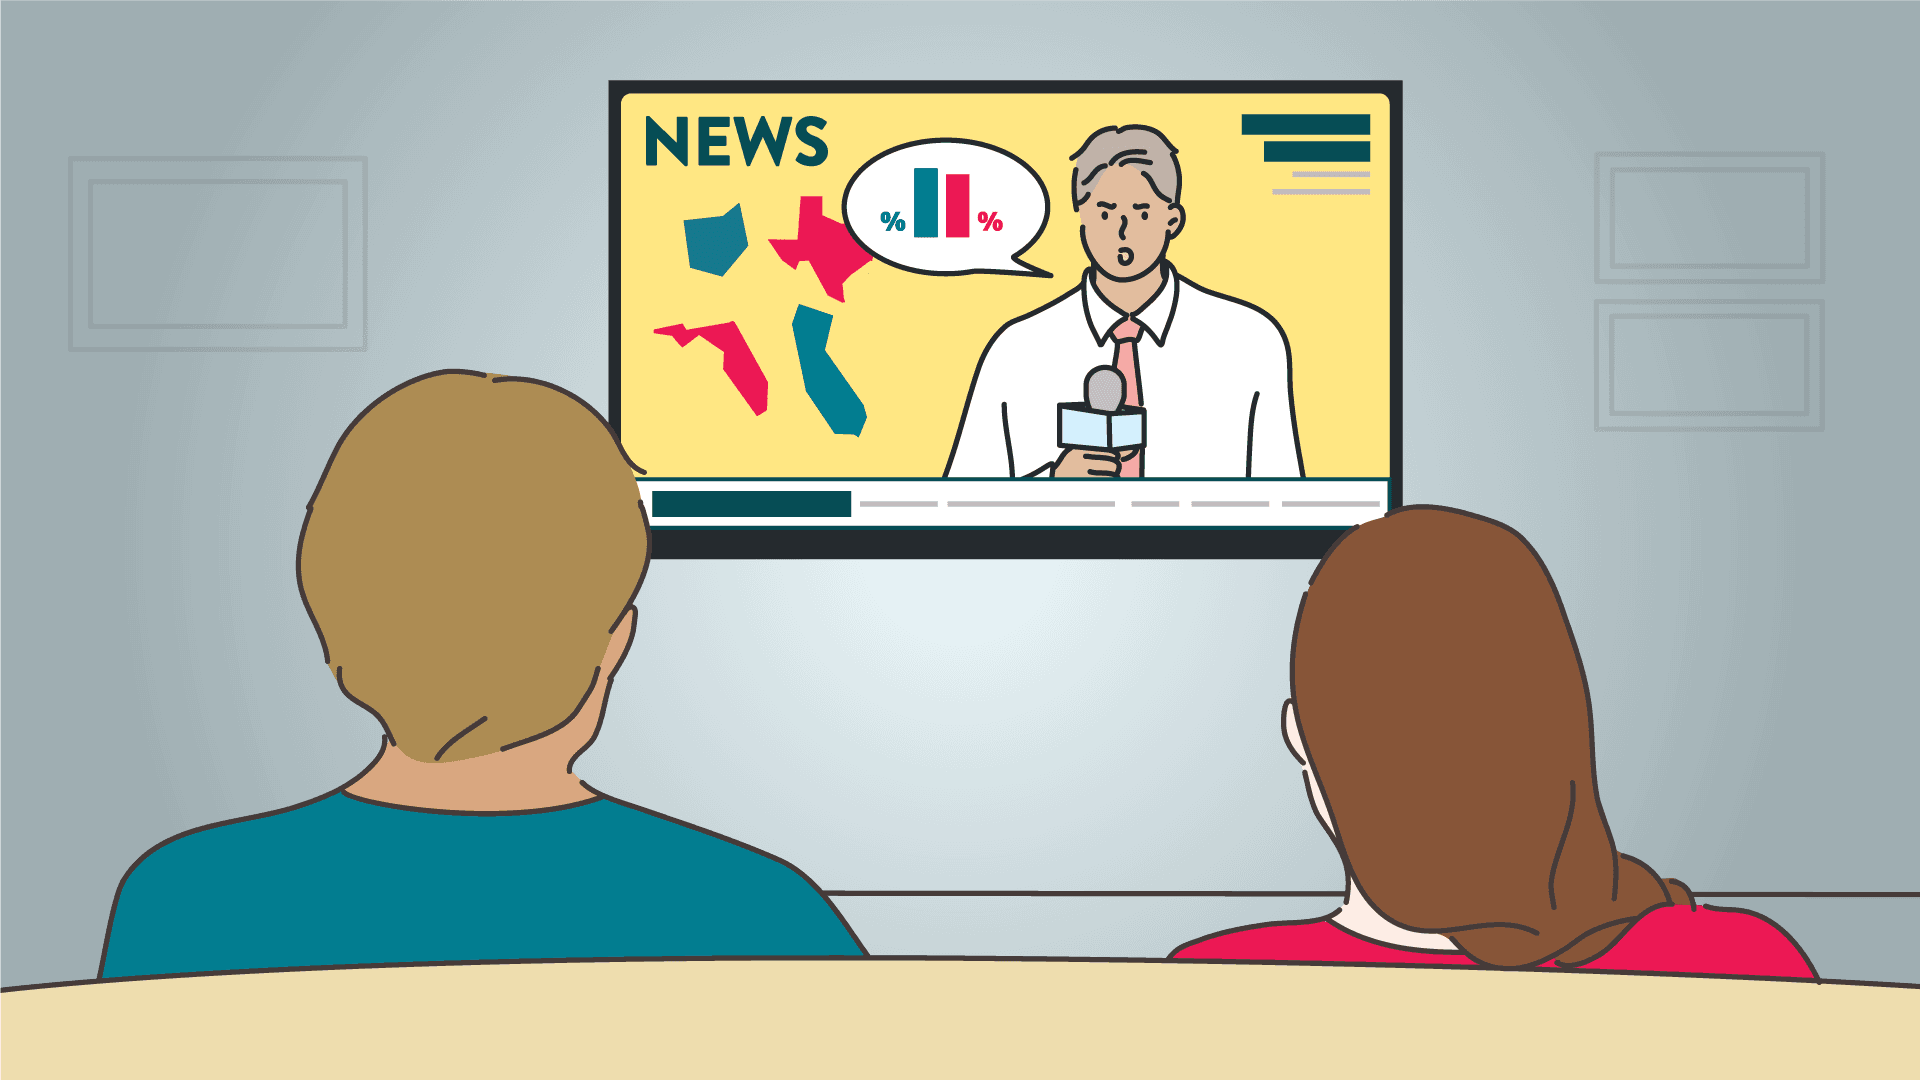 Illustration of two people watching election results on the news